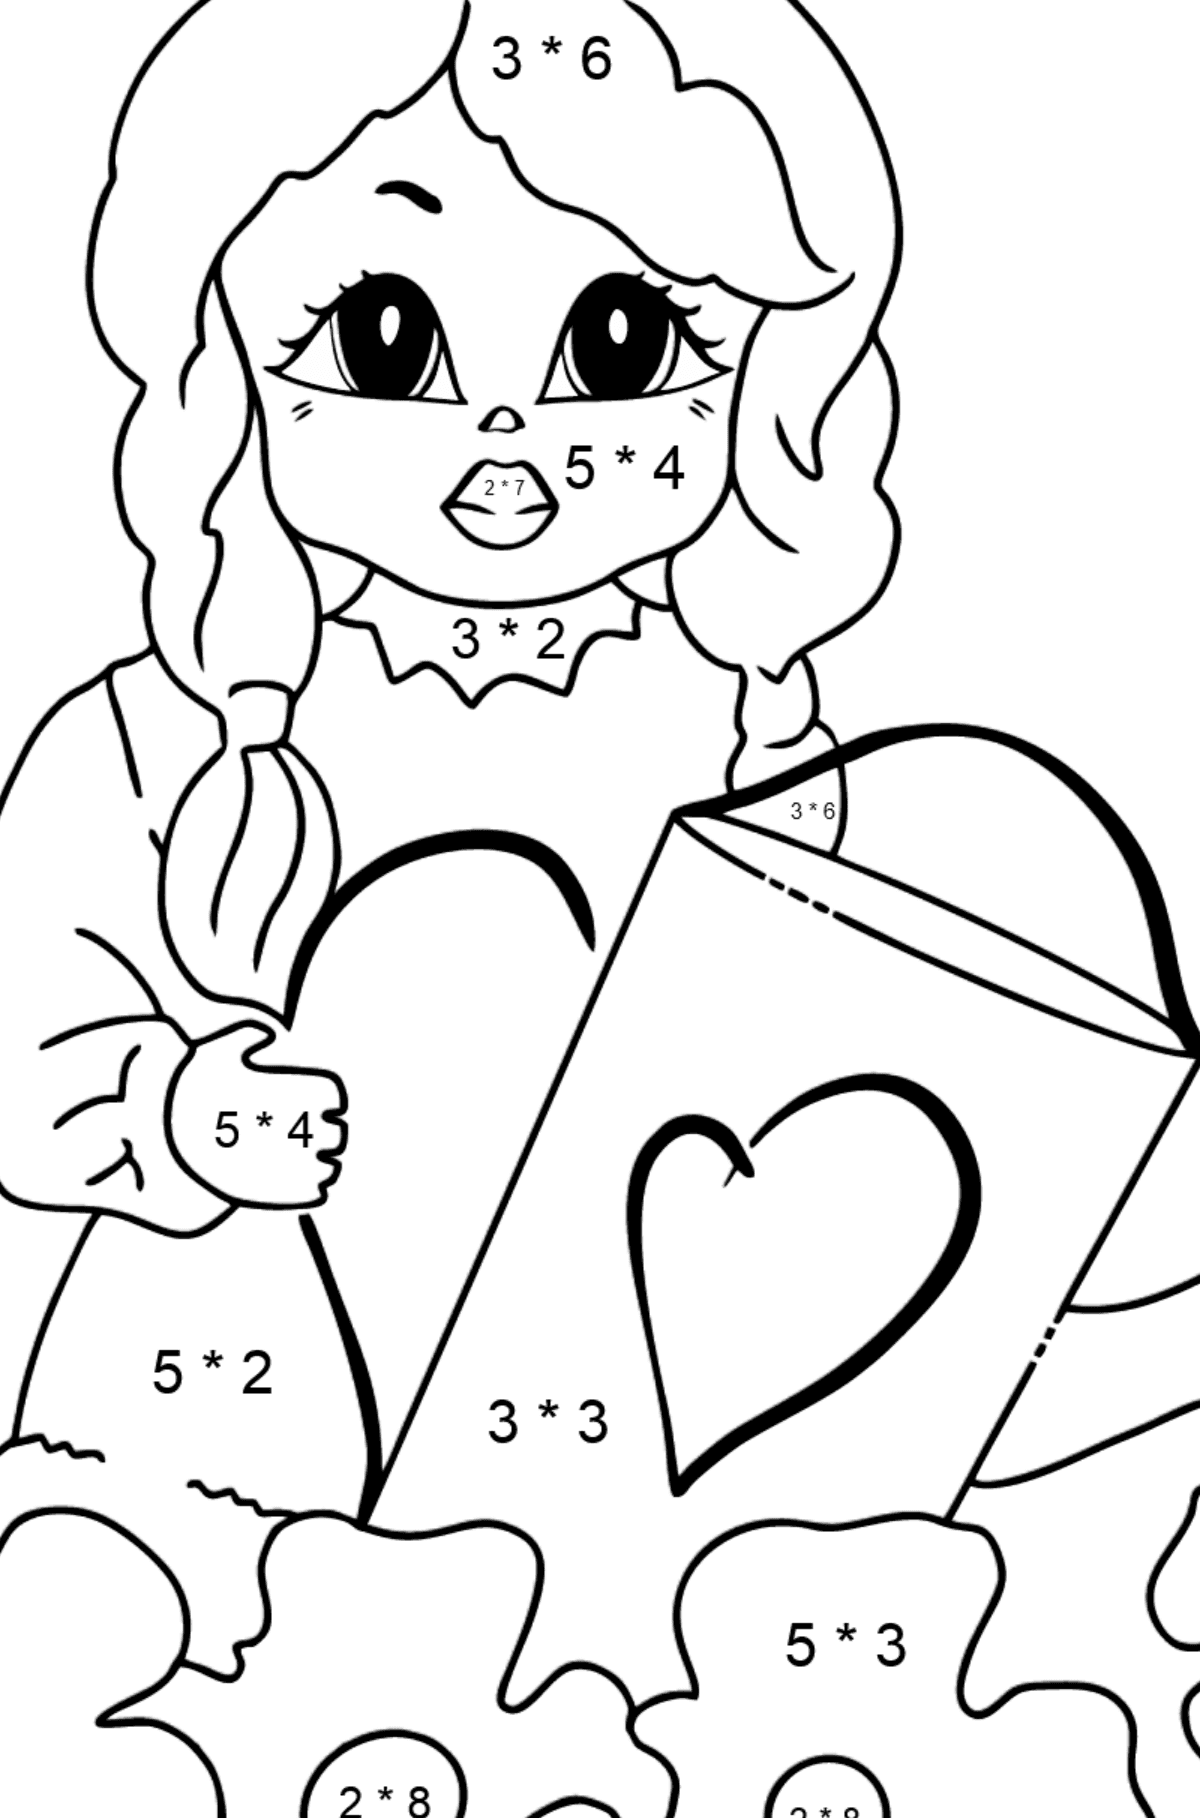 Coloring Picture - A Princess with a Watering Can - Math Coloring - Multiplication for Kids